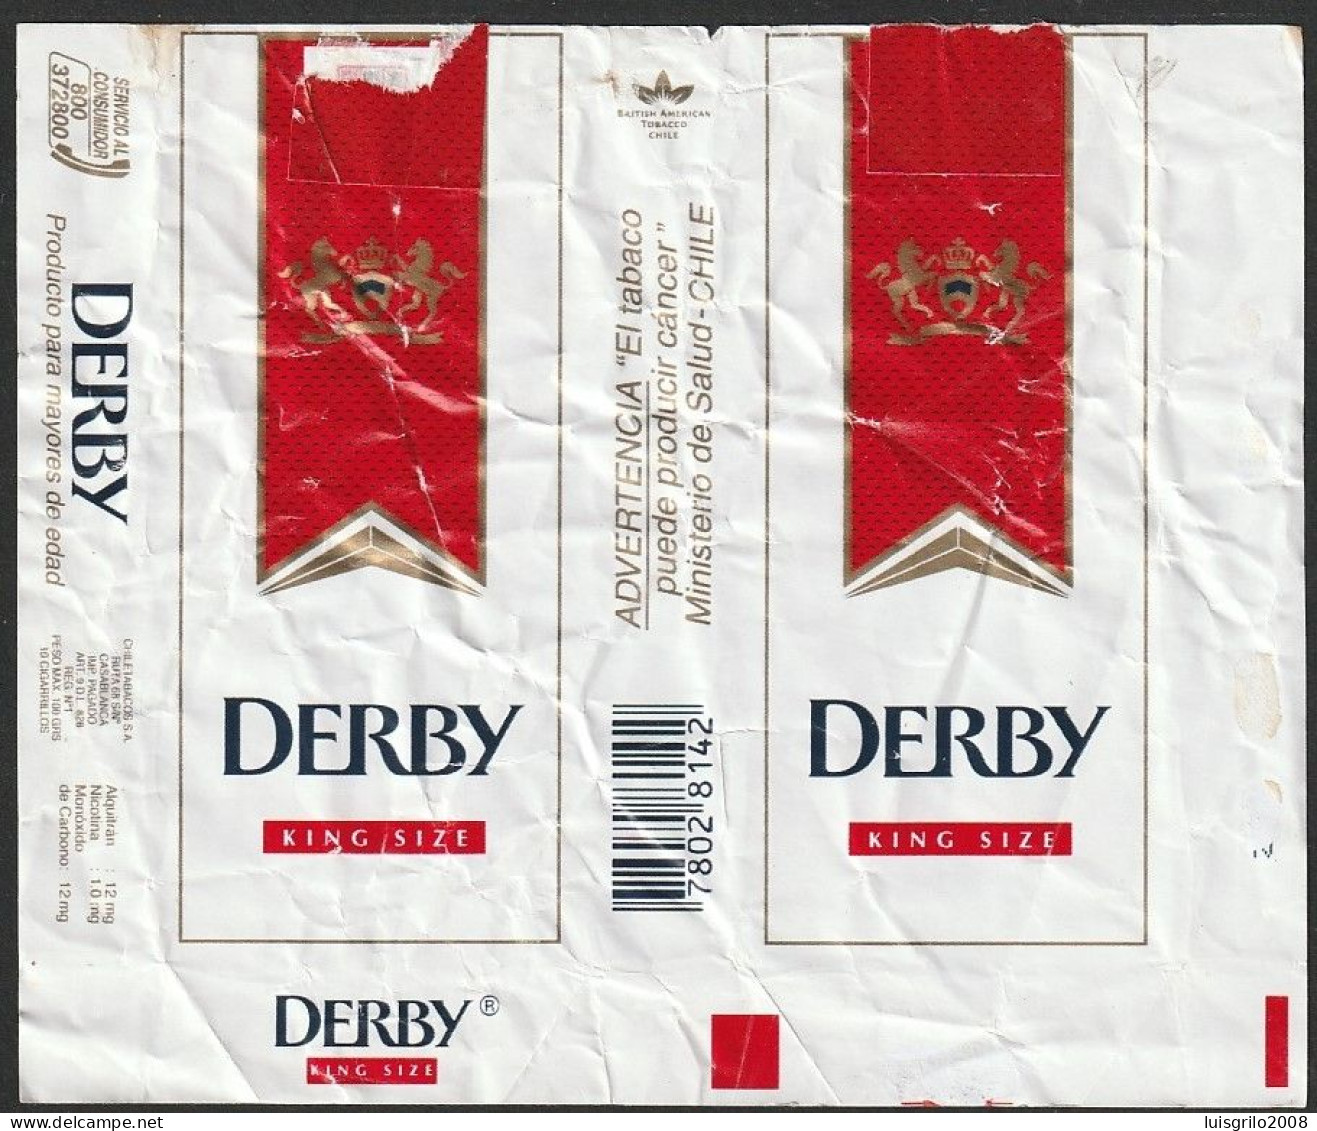 Chile, Old Cigarrette Pack - DERBY King Size -|- Chile Tabacos - Tabaksdozen (leeg)